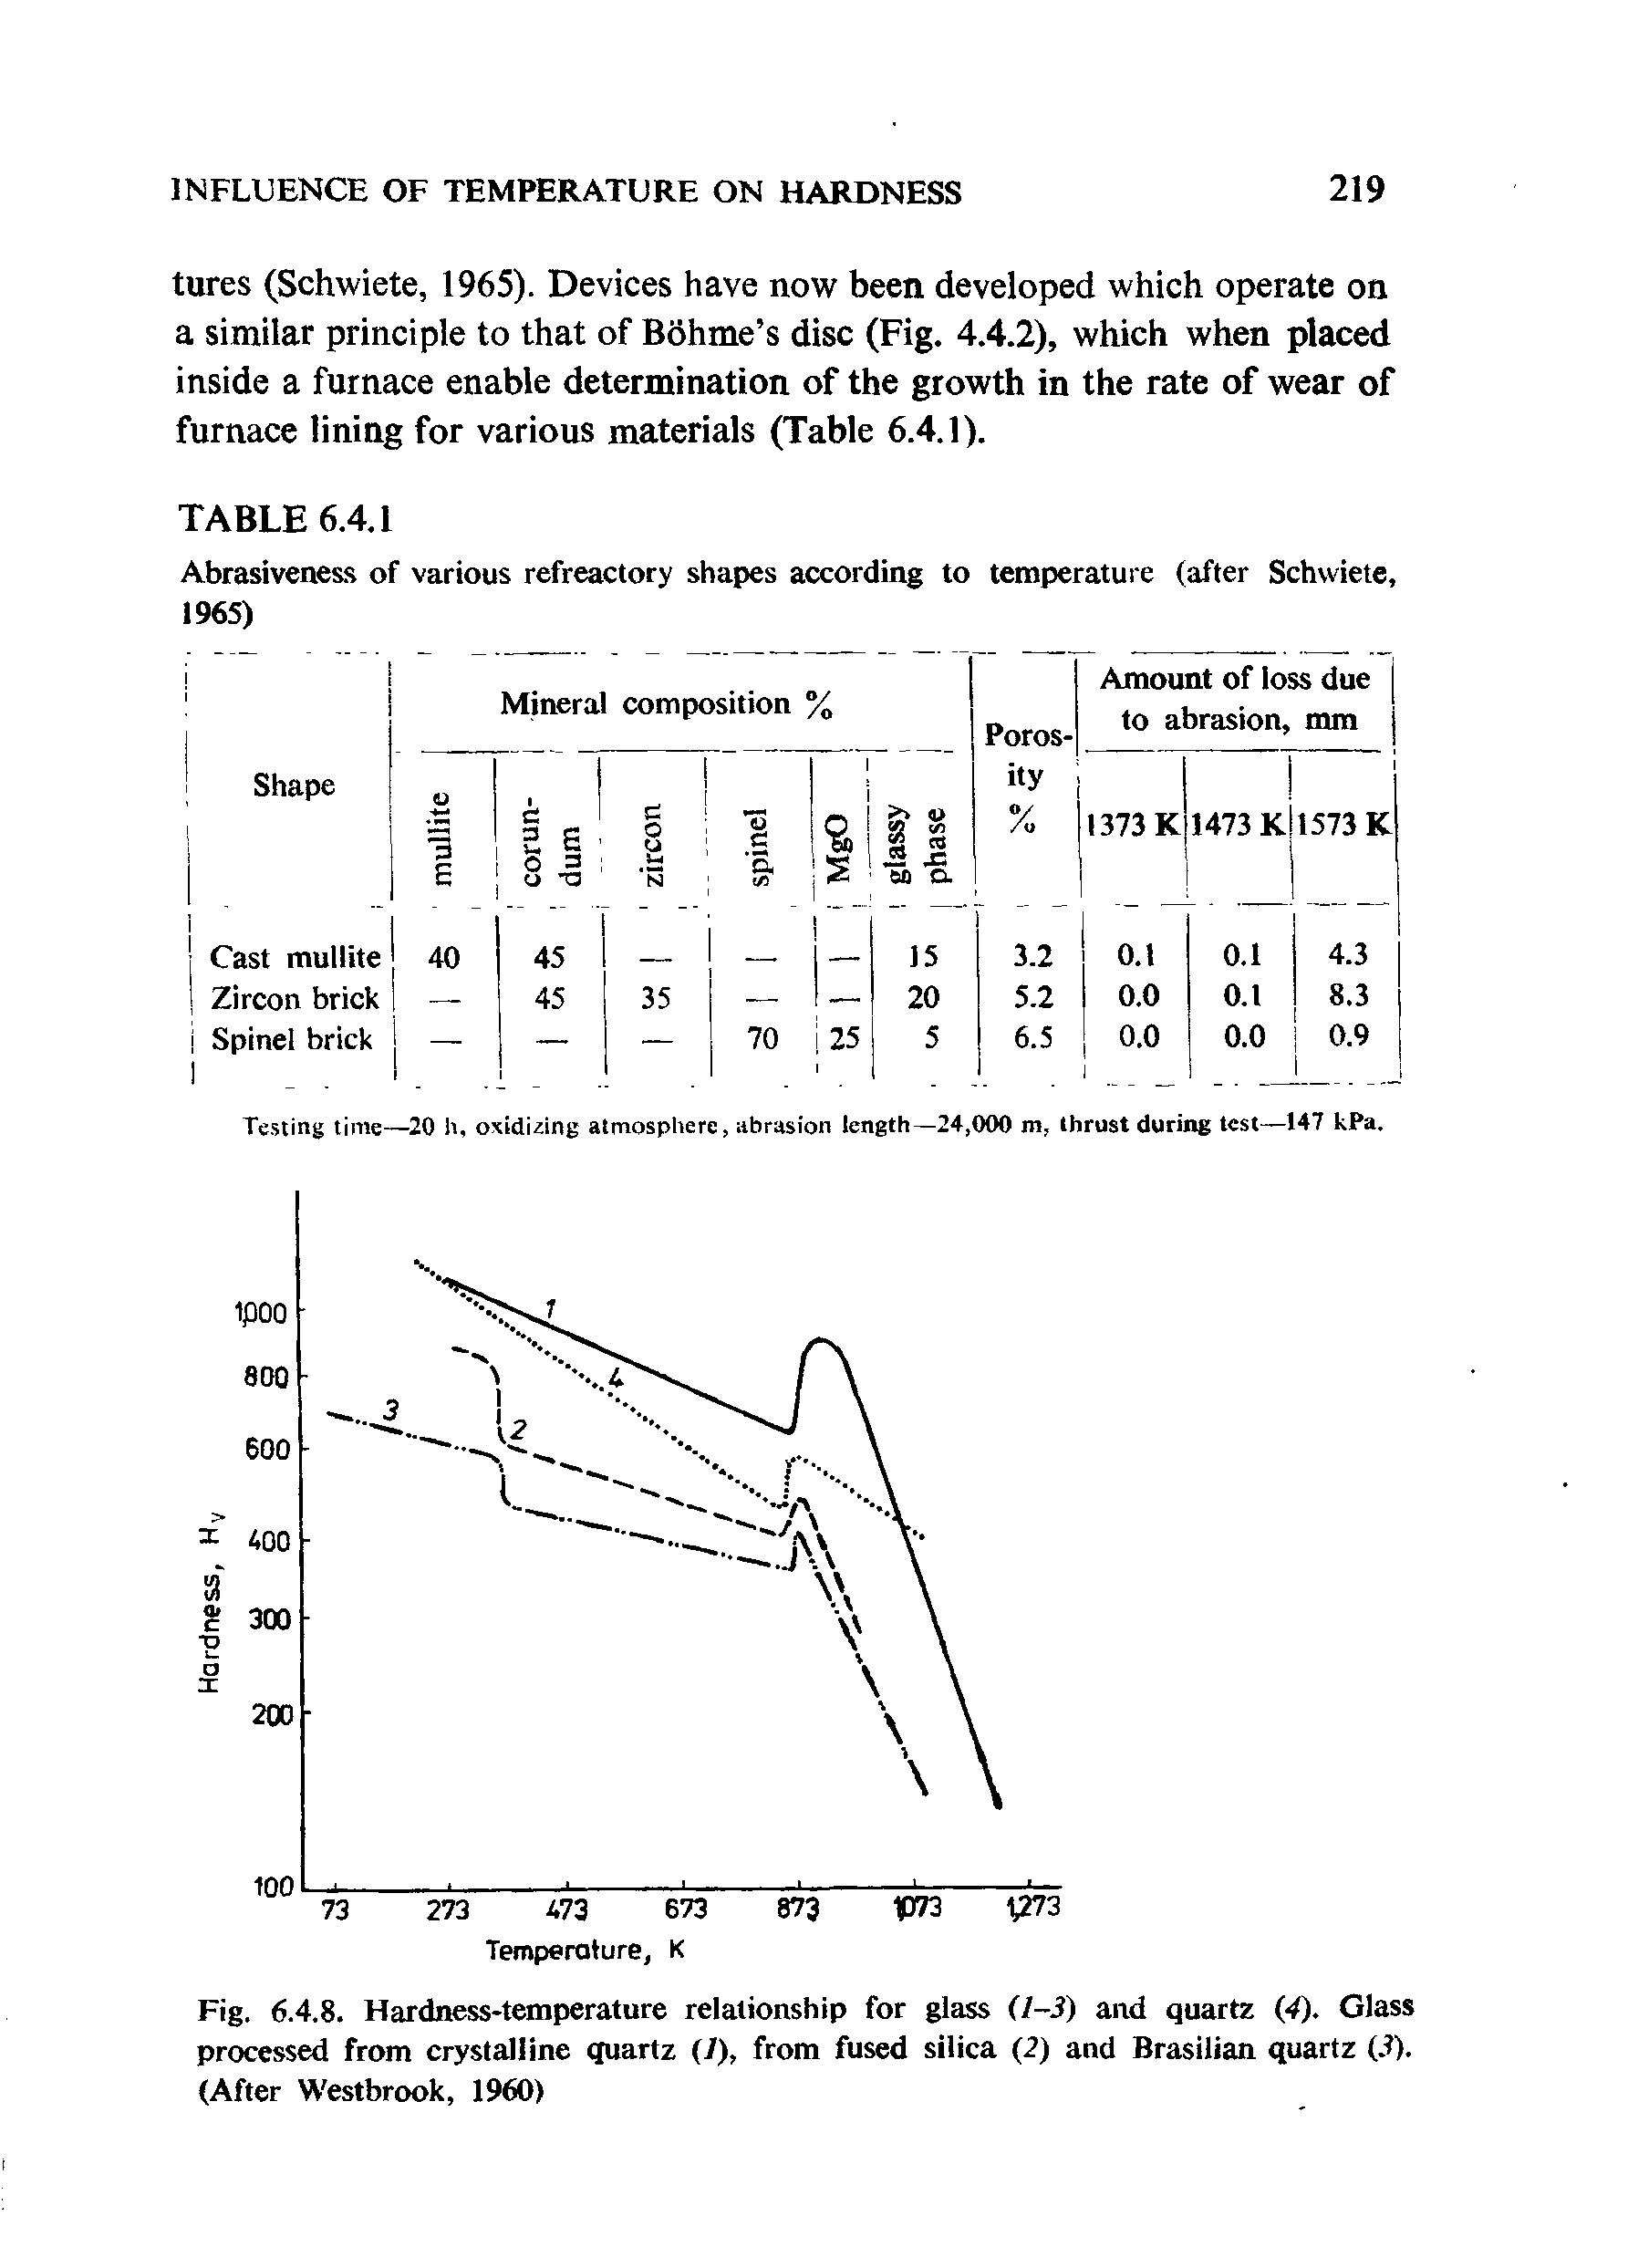 Fig. 6.4.8. Hardness-temperature relationship for glass (1-3) and quartz (4). Glass processed from crystalline quartz (/), from fused silica (2) and Brasilian quartz (J). (After Westbrook, 1960)...